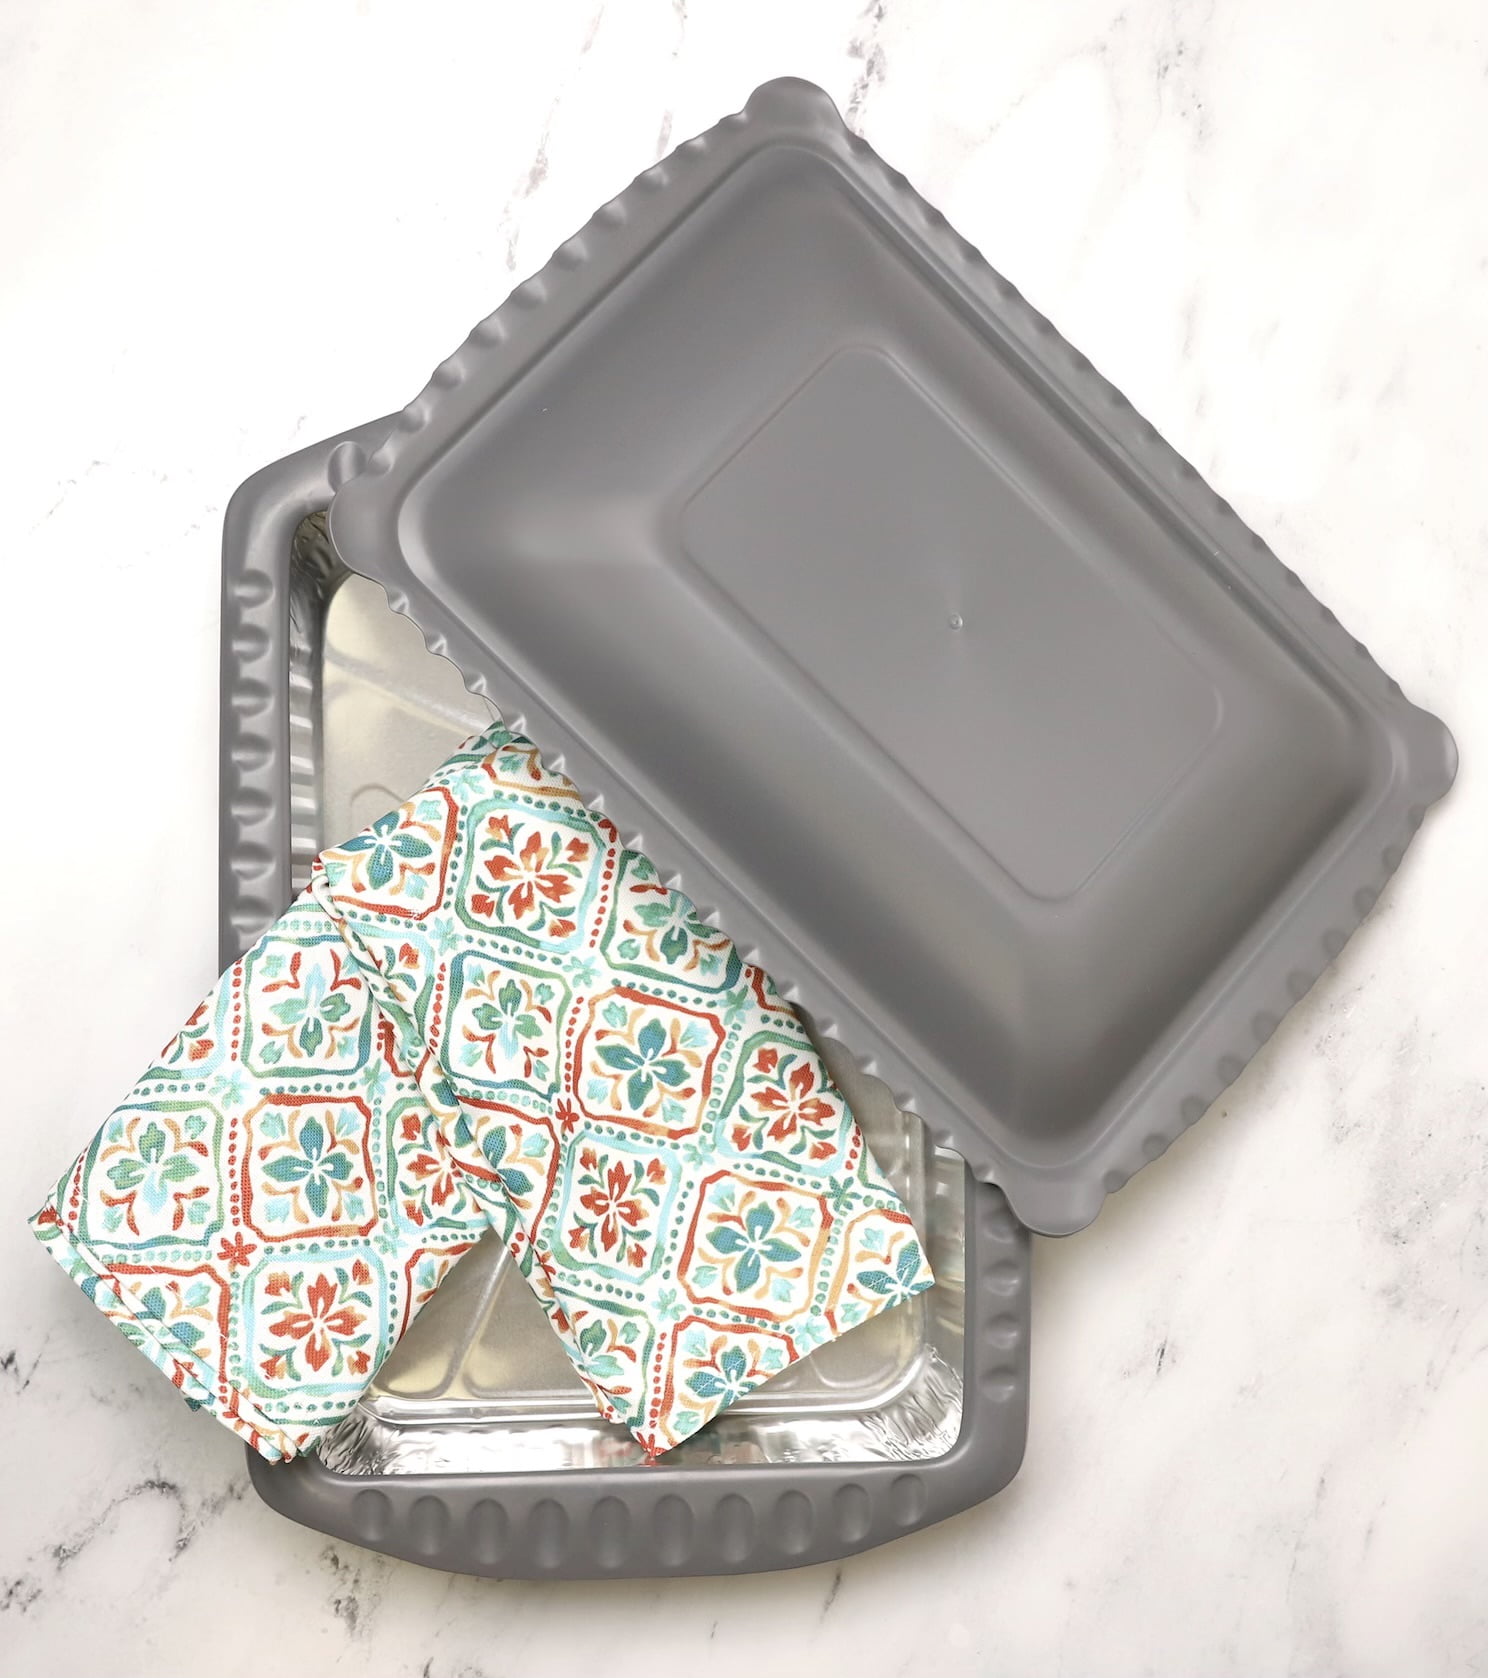  Foil Decor Serving and Casserole Carrier for 9x13 Foil Pans,  Heat Resistant w/Handles, Lid Locks in Place for Safe and Easy Carrying,  Lid Doubles as a Serving Dish, 2 Aluminum Pans